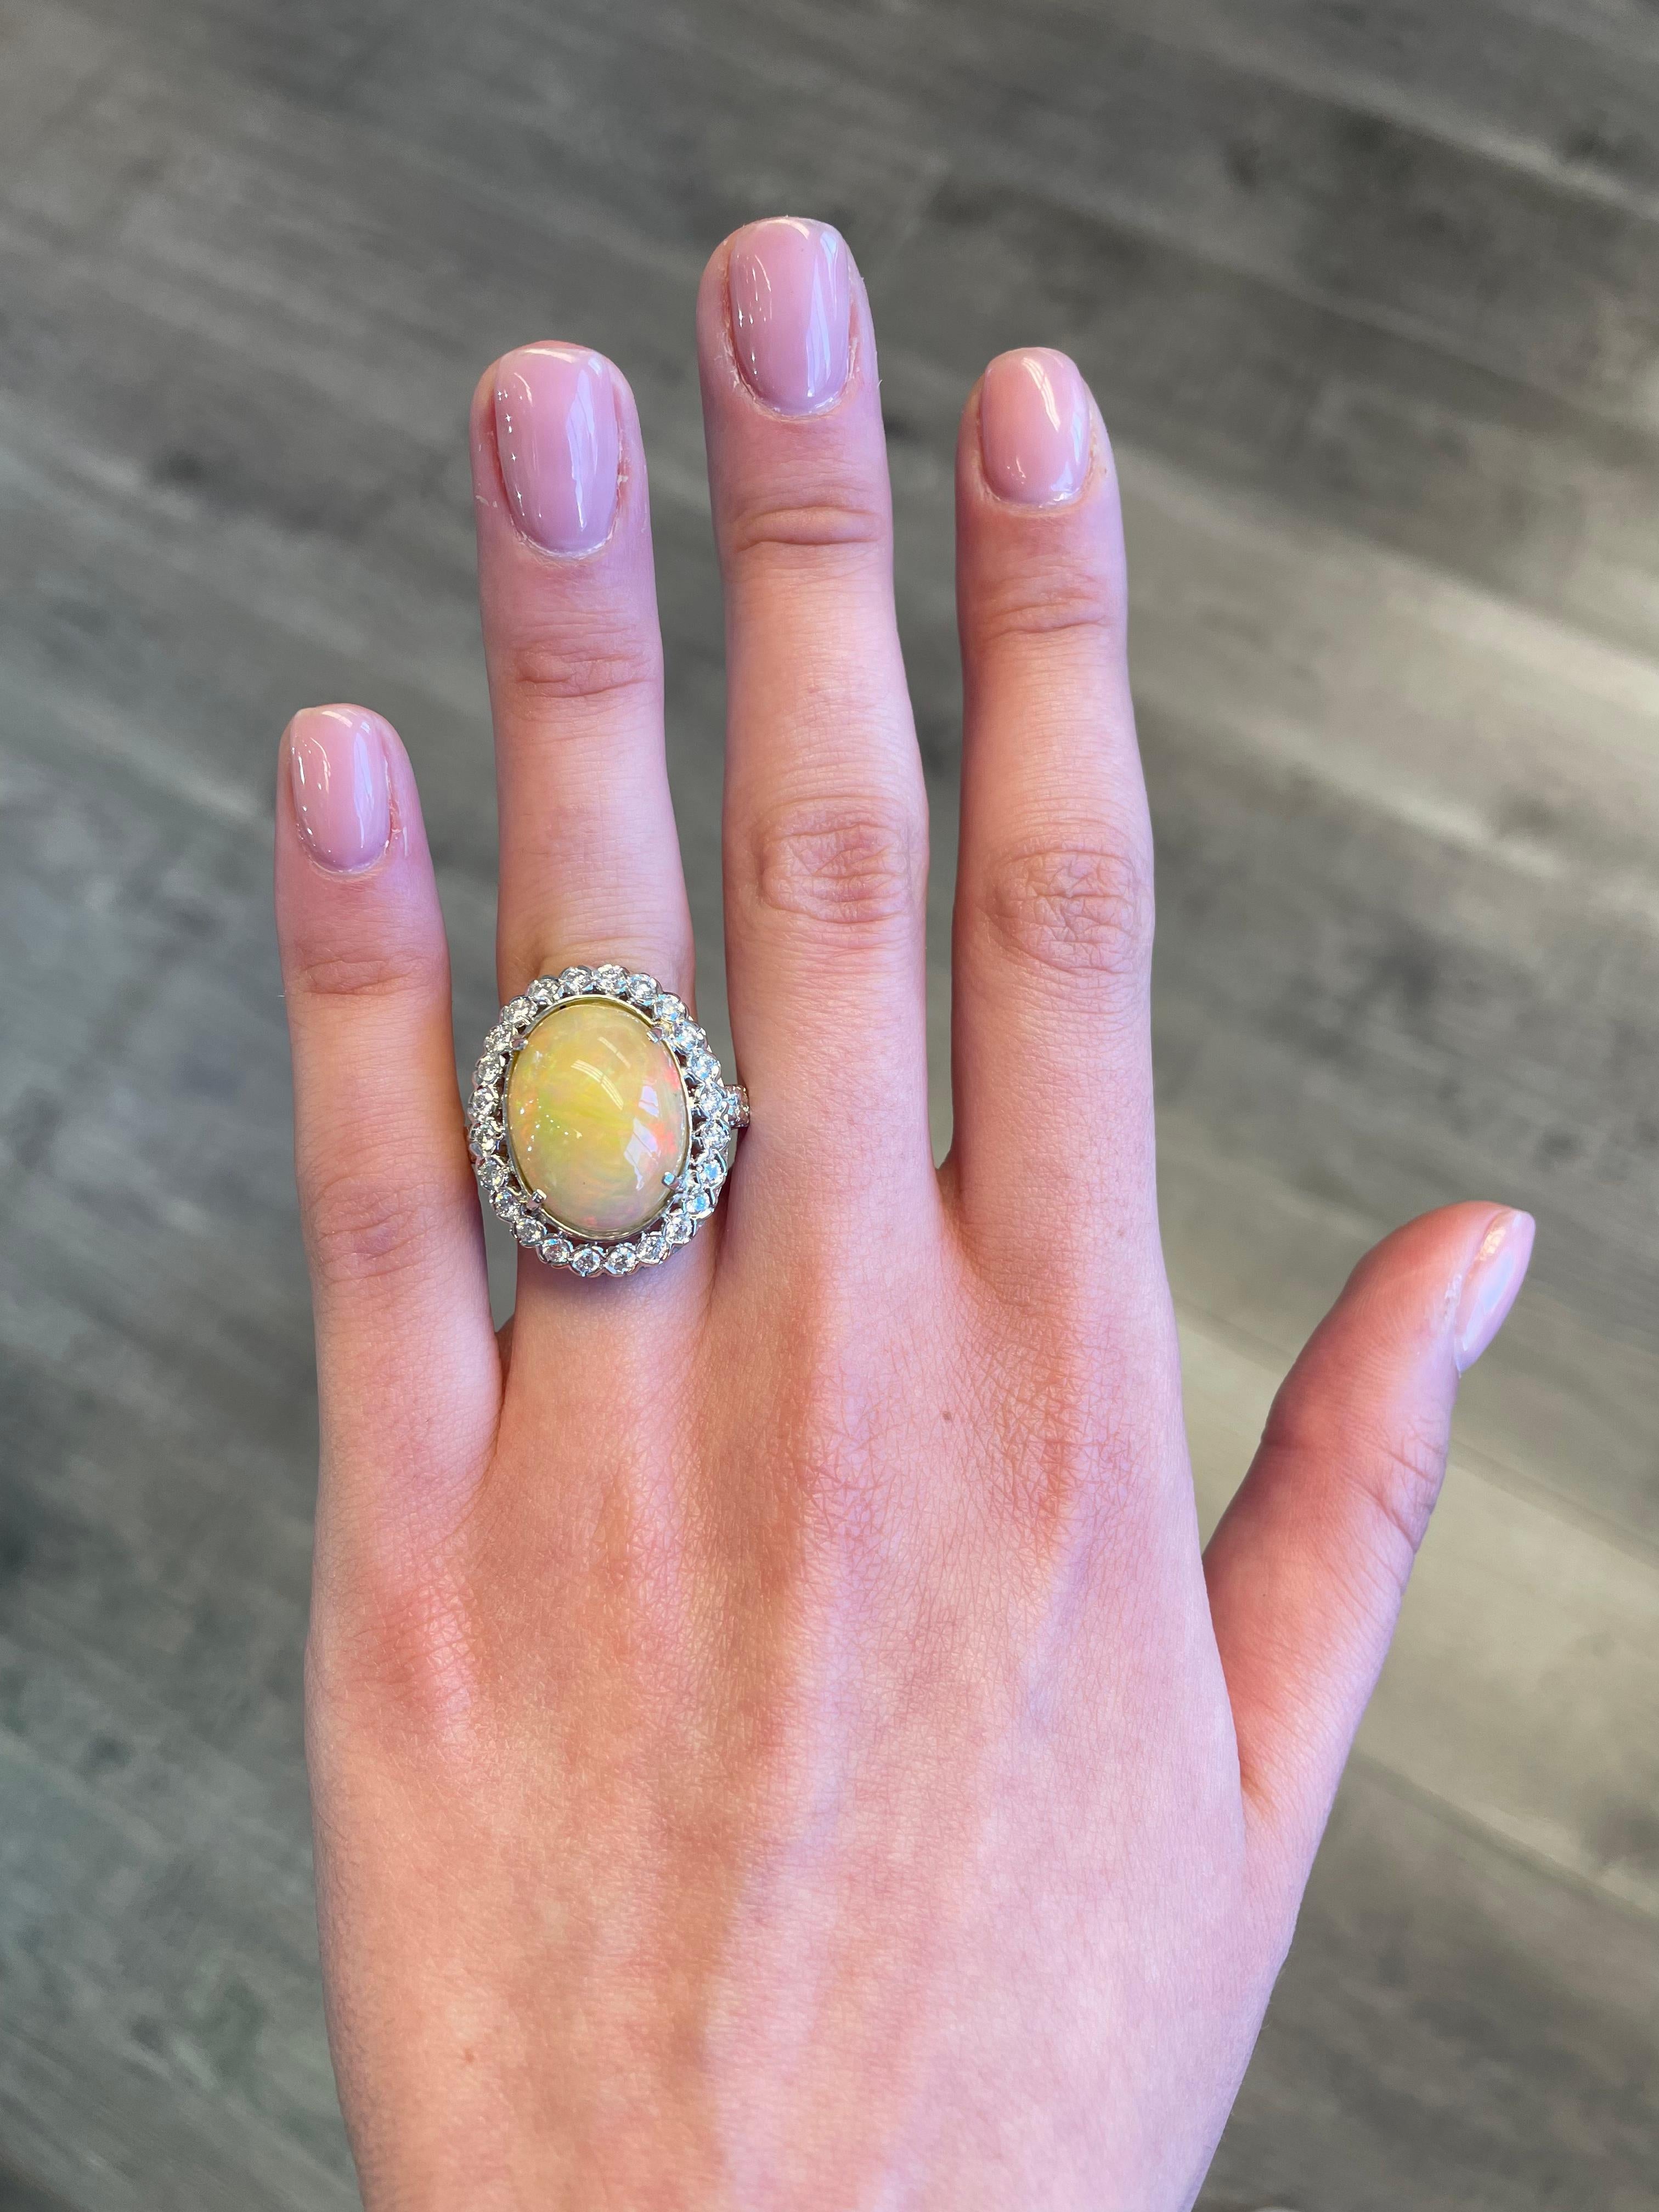 Opal with diamond halo ring.
Center white opal complimented by round brilliant diamonds, approximately G/H color and SI clarity. 18k white gold with filigree work, current ring size 8. 
Accommodated with an up to date appraisal by a GIA G.G. upon